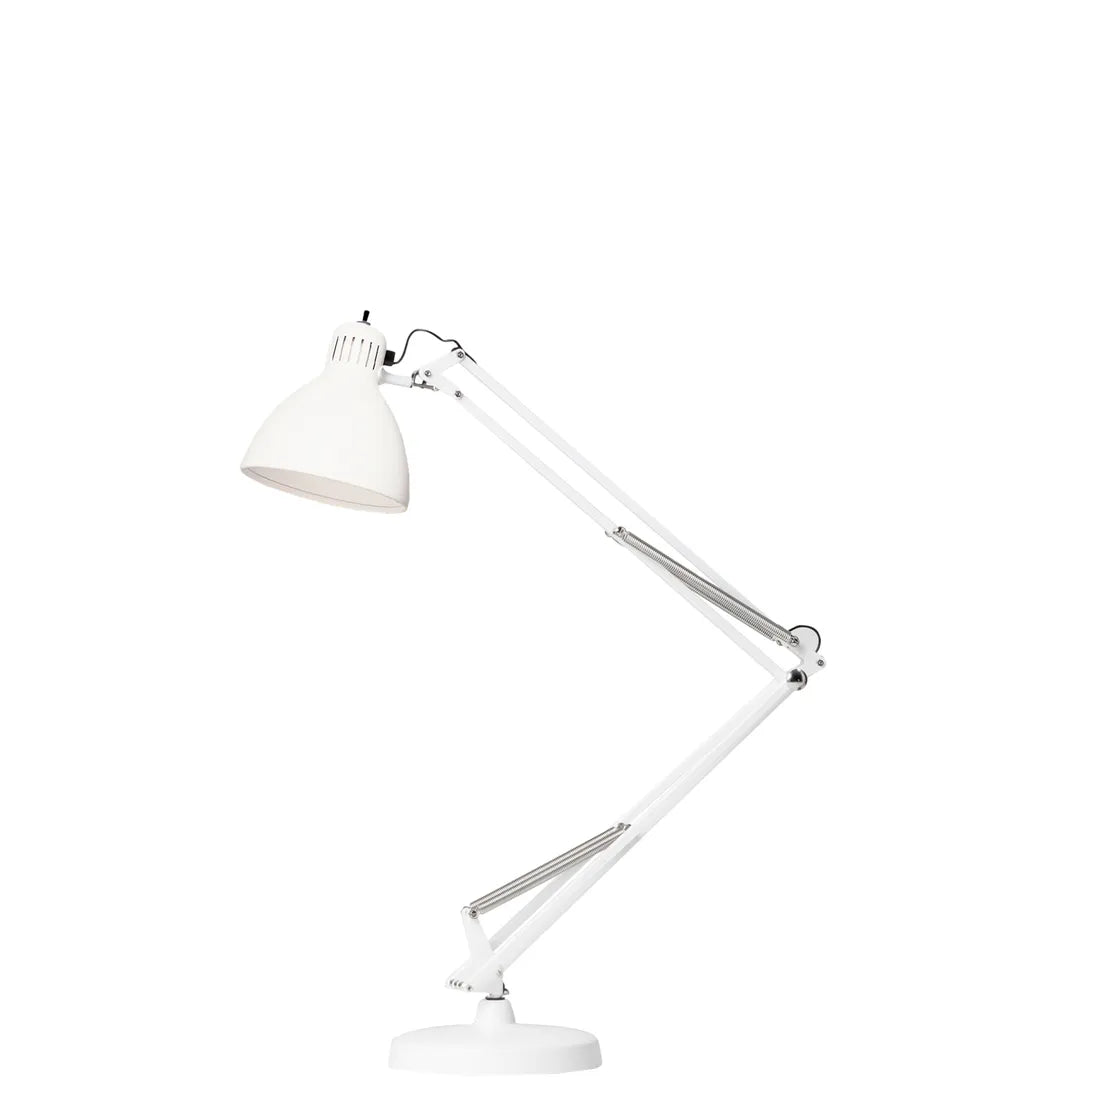 small table lamp, designer metal table lamp, adjustable study table lights online india, Adjustable task Study Small table Lamps online